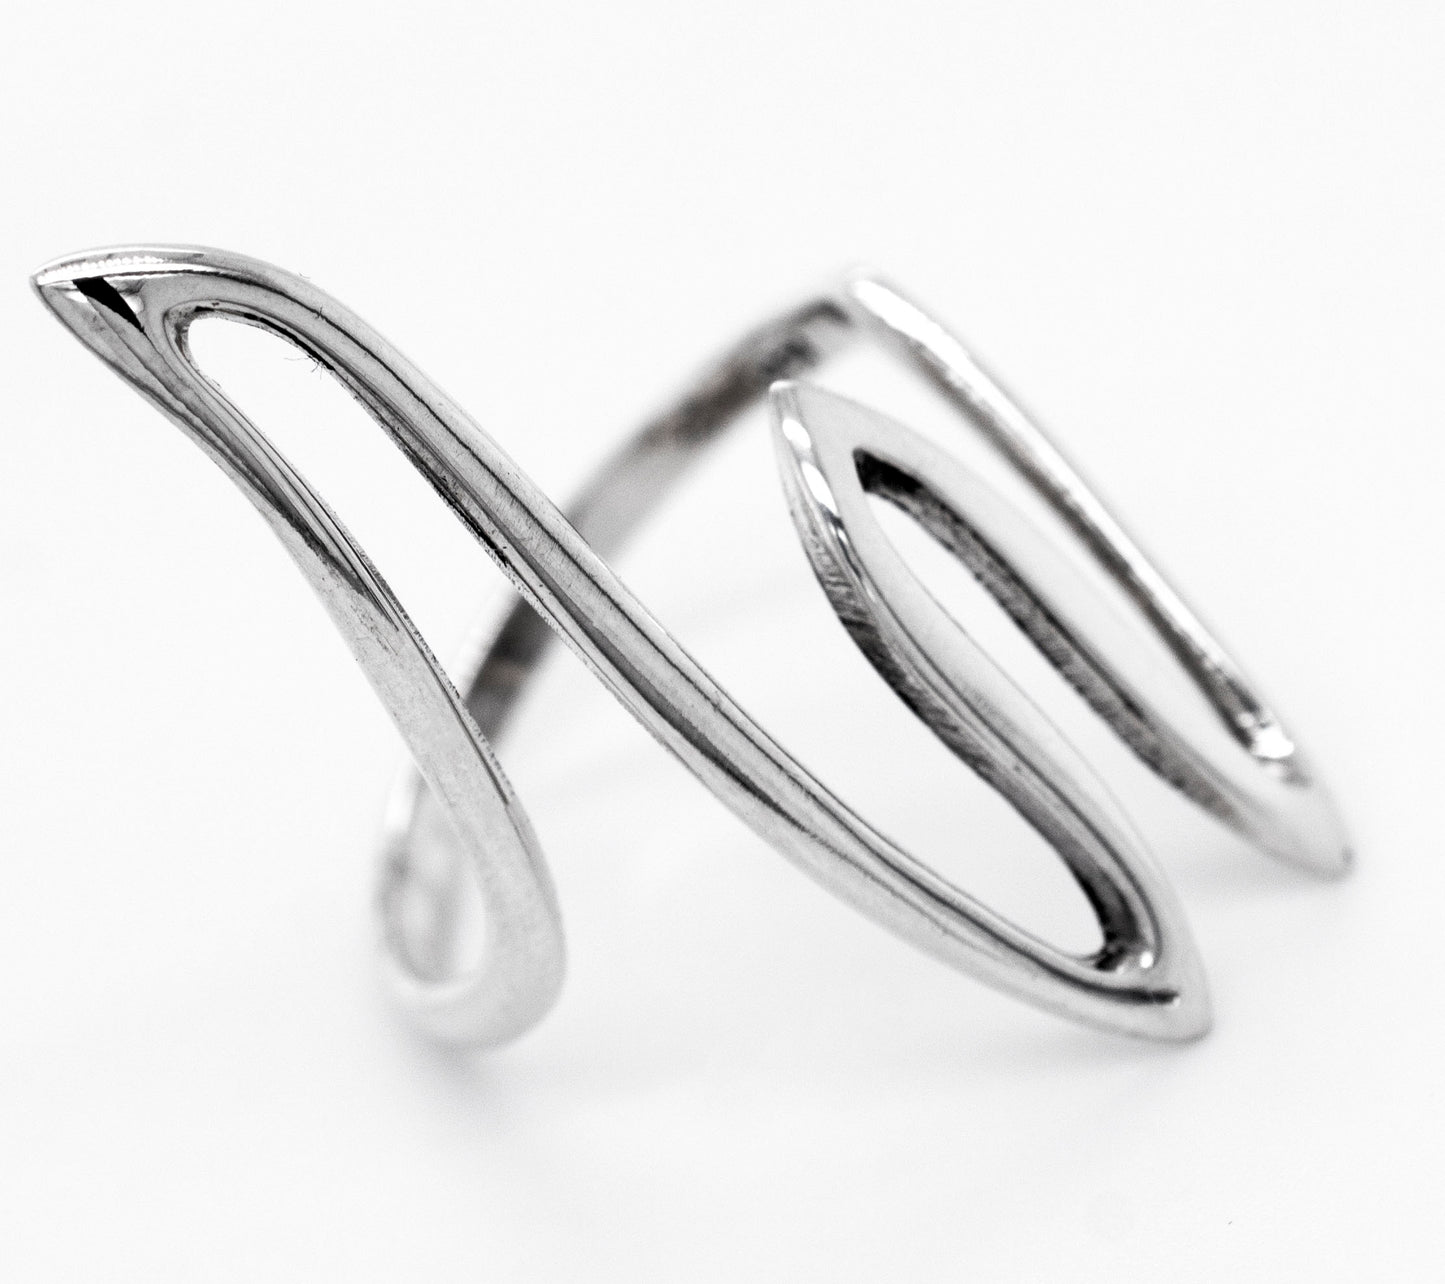 A simple Large Squiggle Pattern Ring with a squiggle pattern, perfect for stacking or fitting the shape of any finger, from Super Silver.